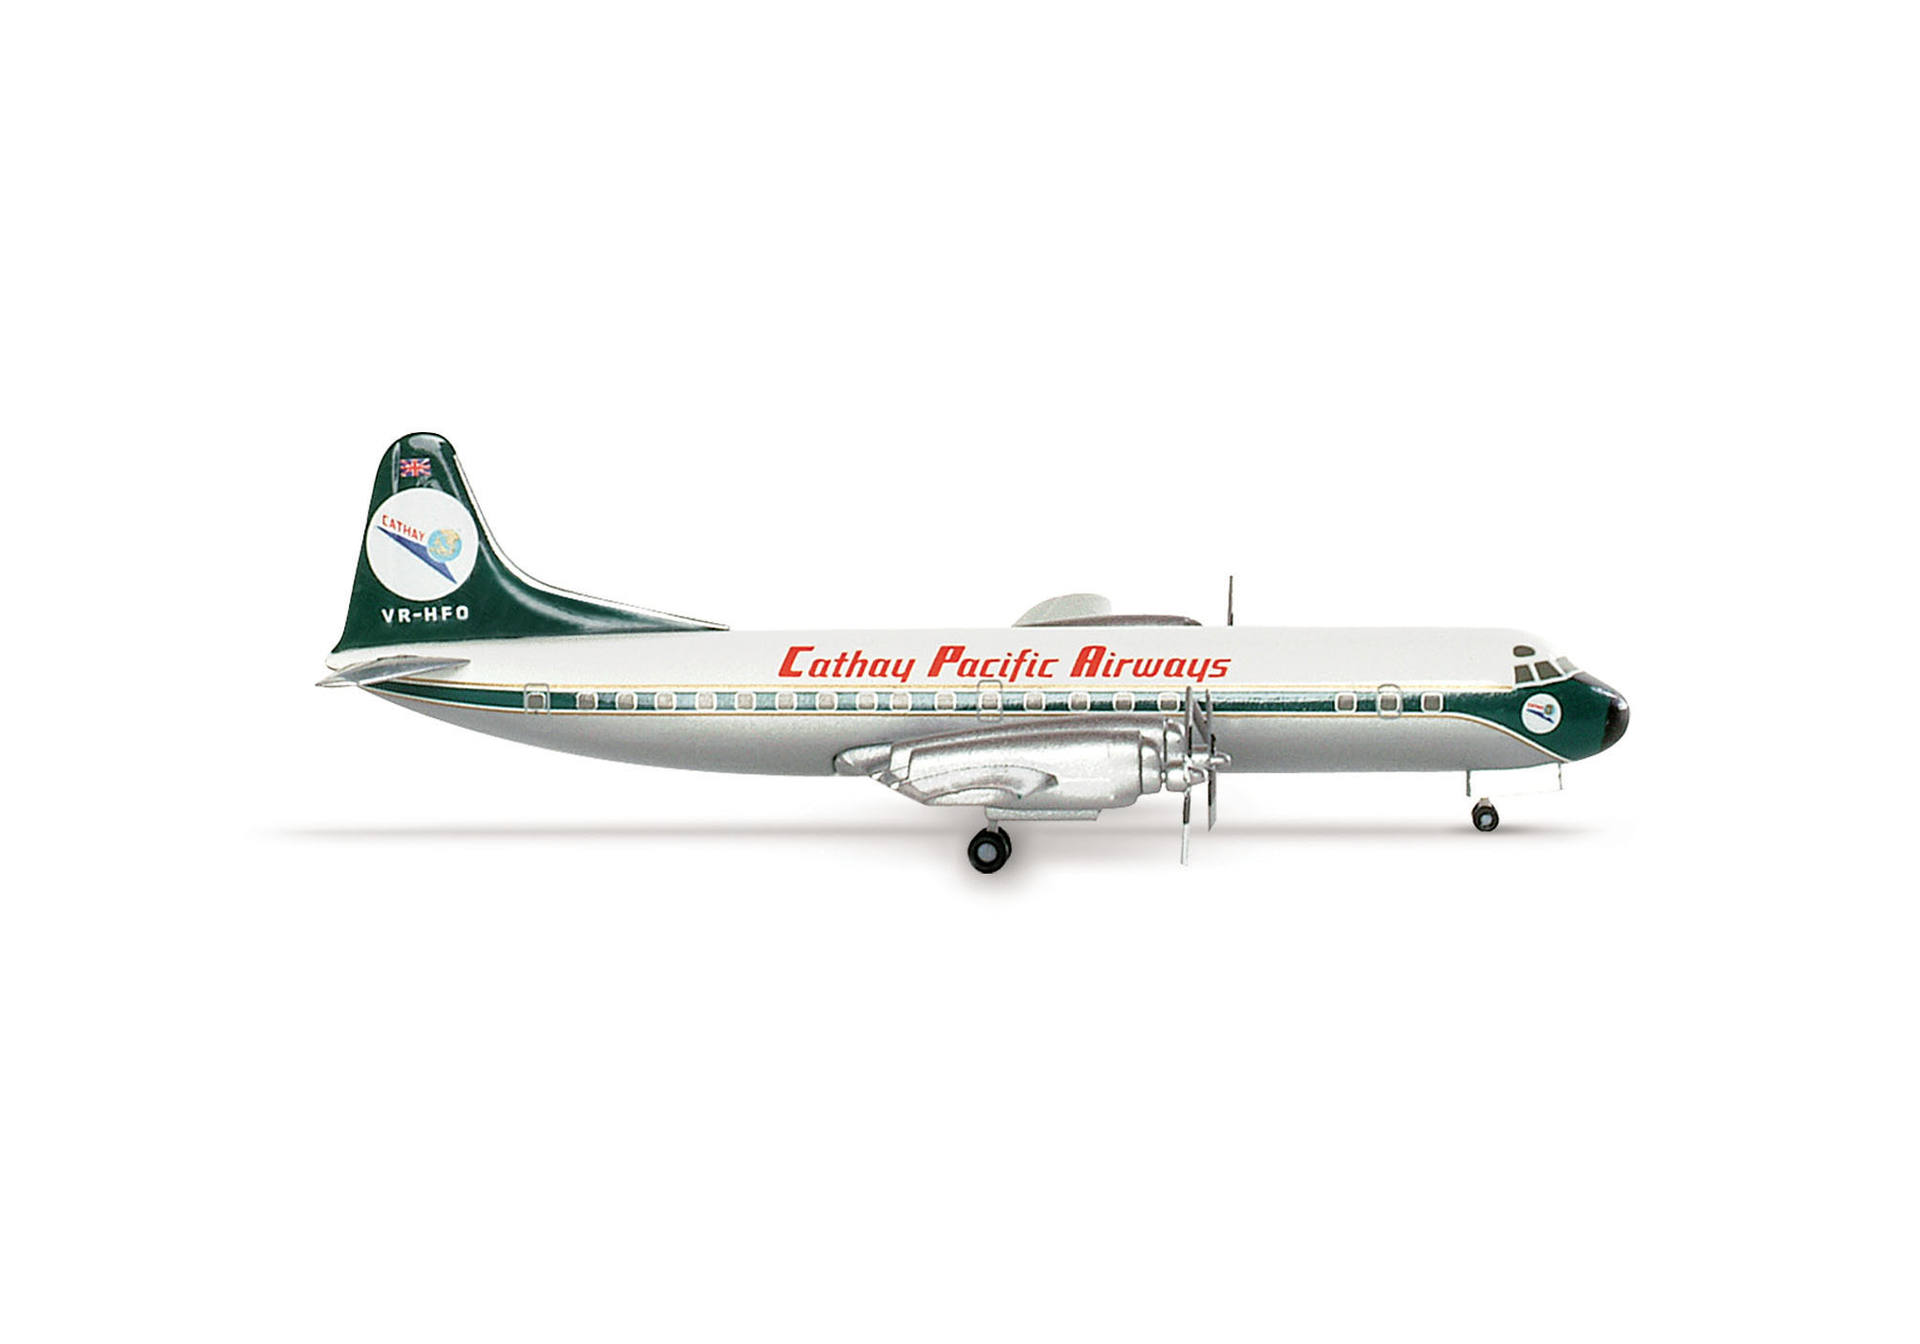 Cathay Pacific Airways Lockheed L-188A Electra "60th Anniversary"